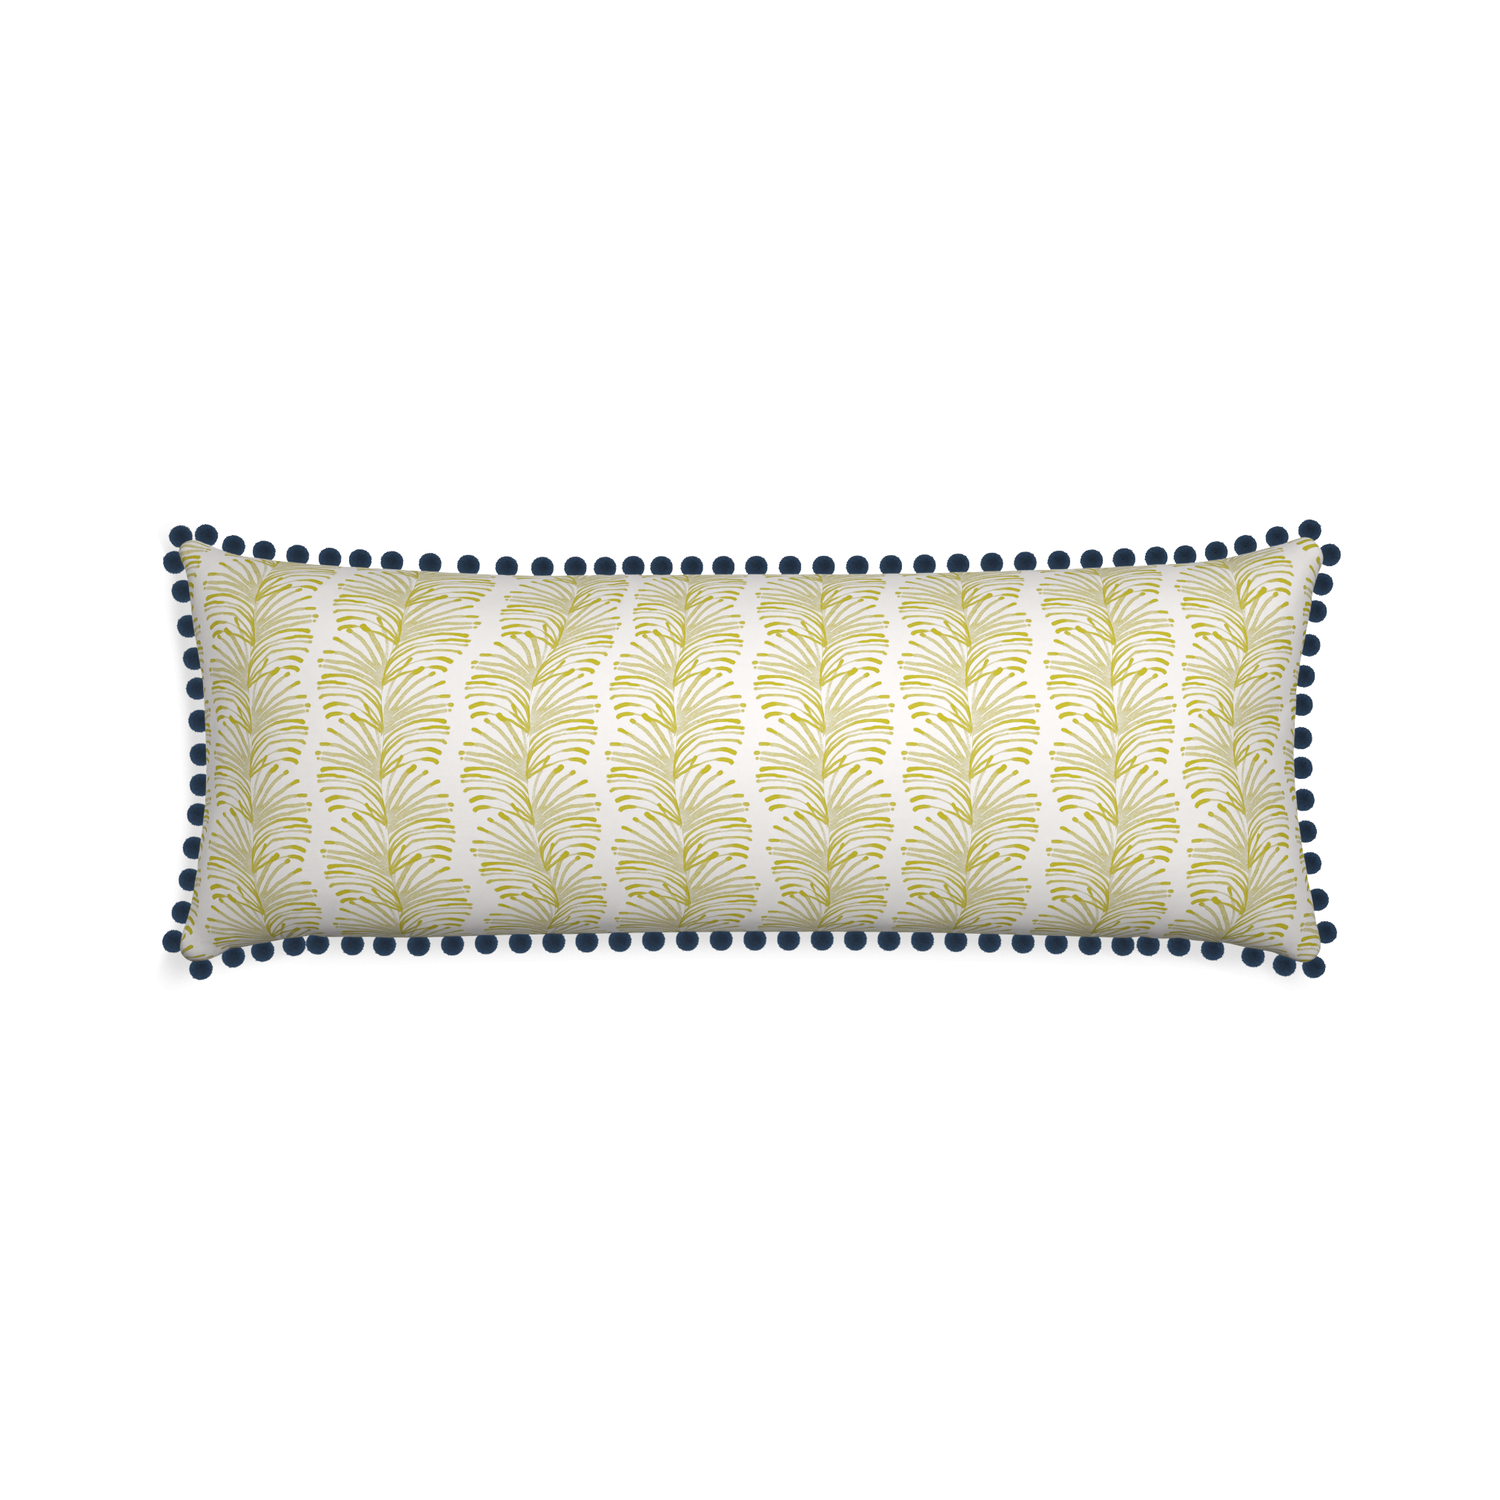 Xl-lumbar emma chartreuse custom yellow stripe chartreusepillow with c on white background